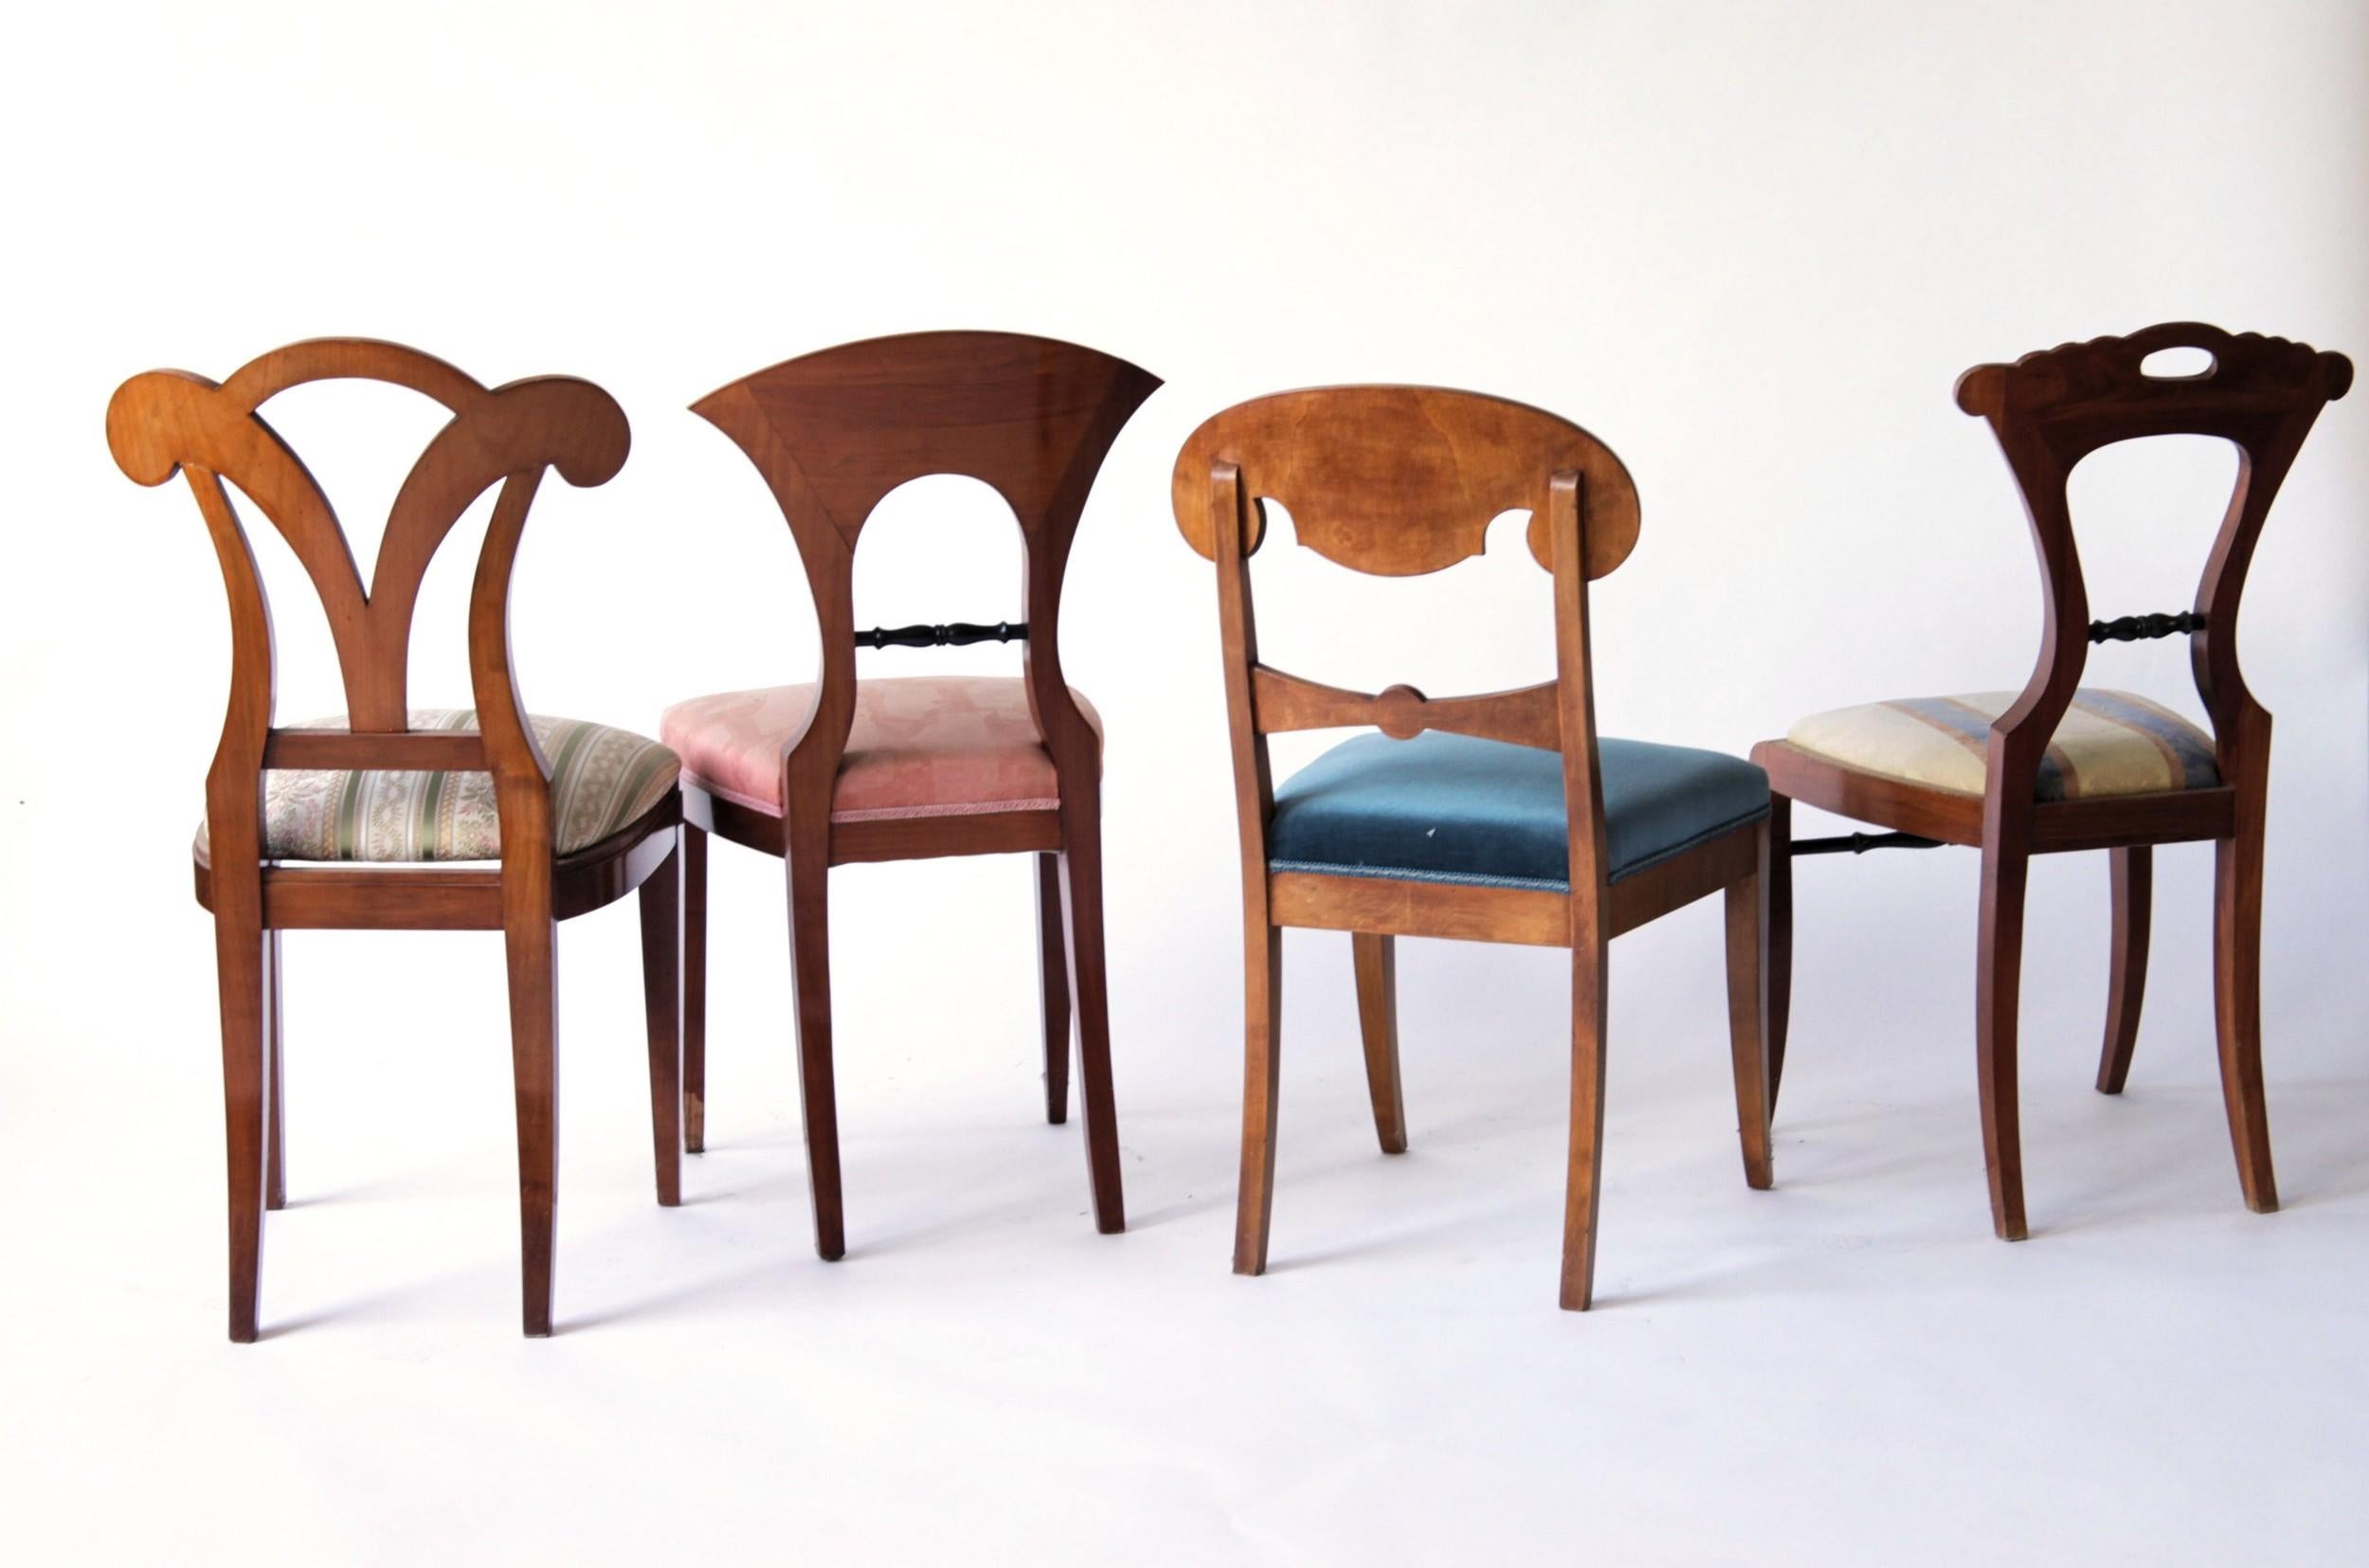 different chair designs